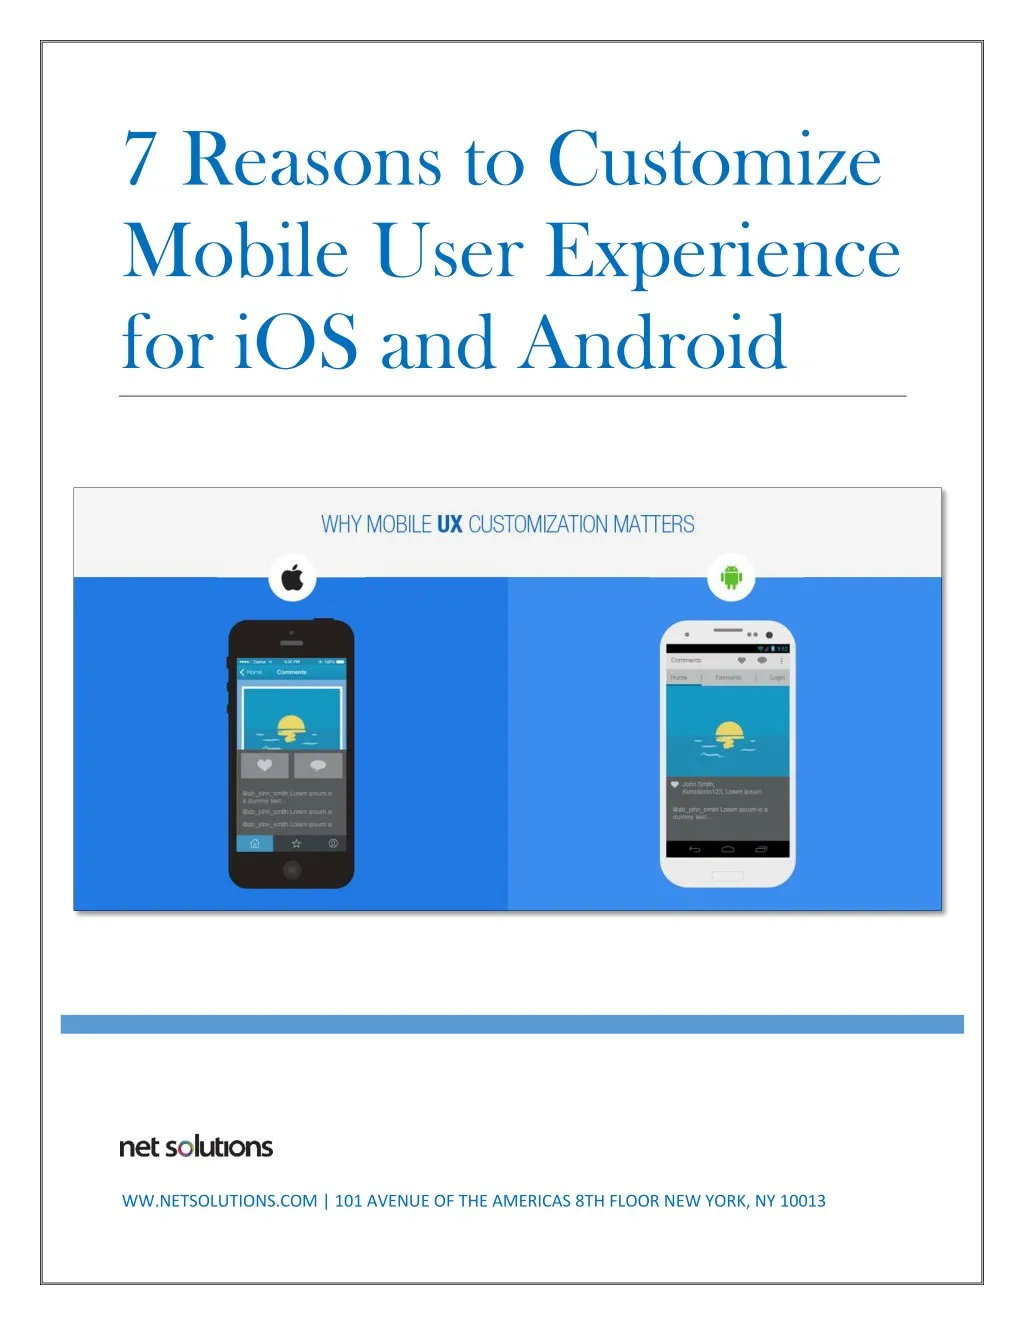 7 reasons to customize mobile user experience